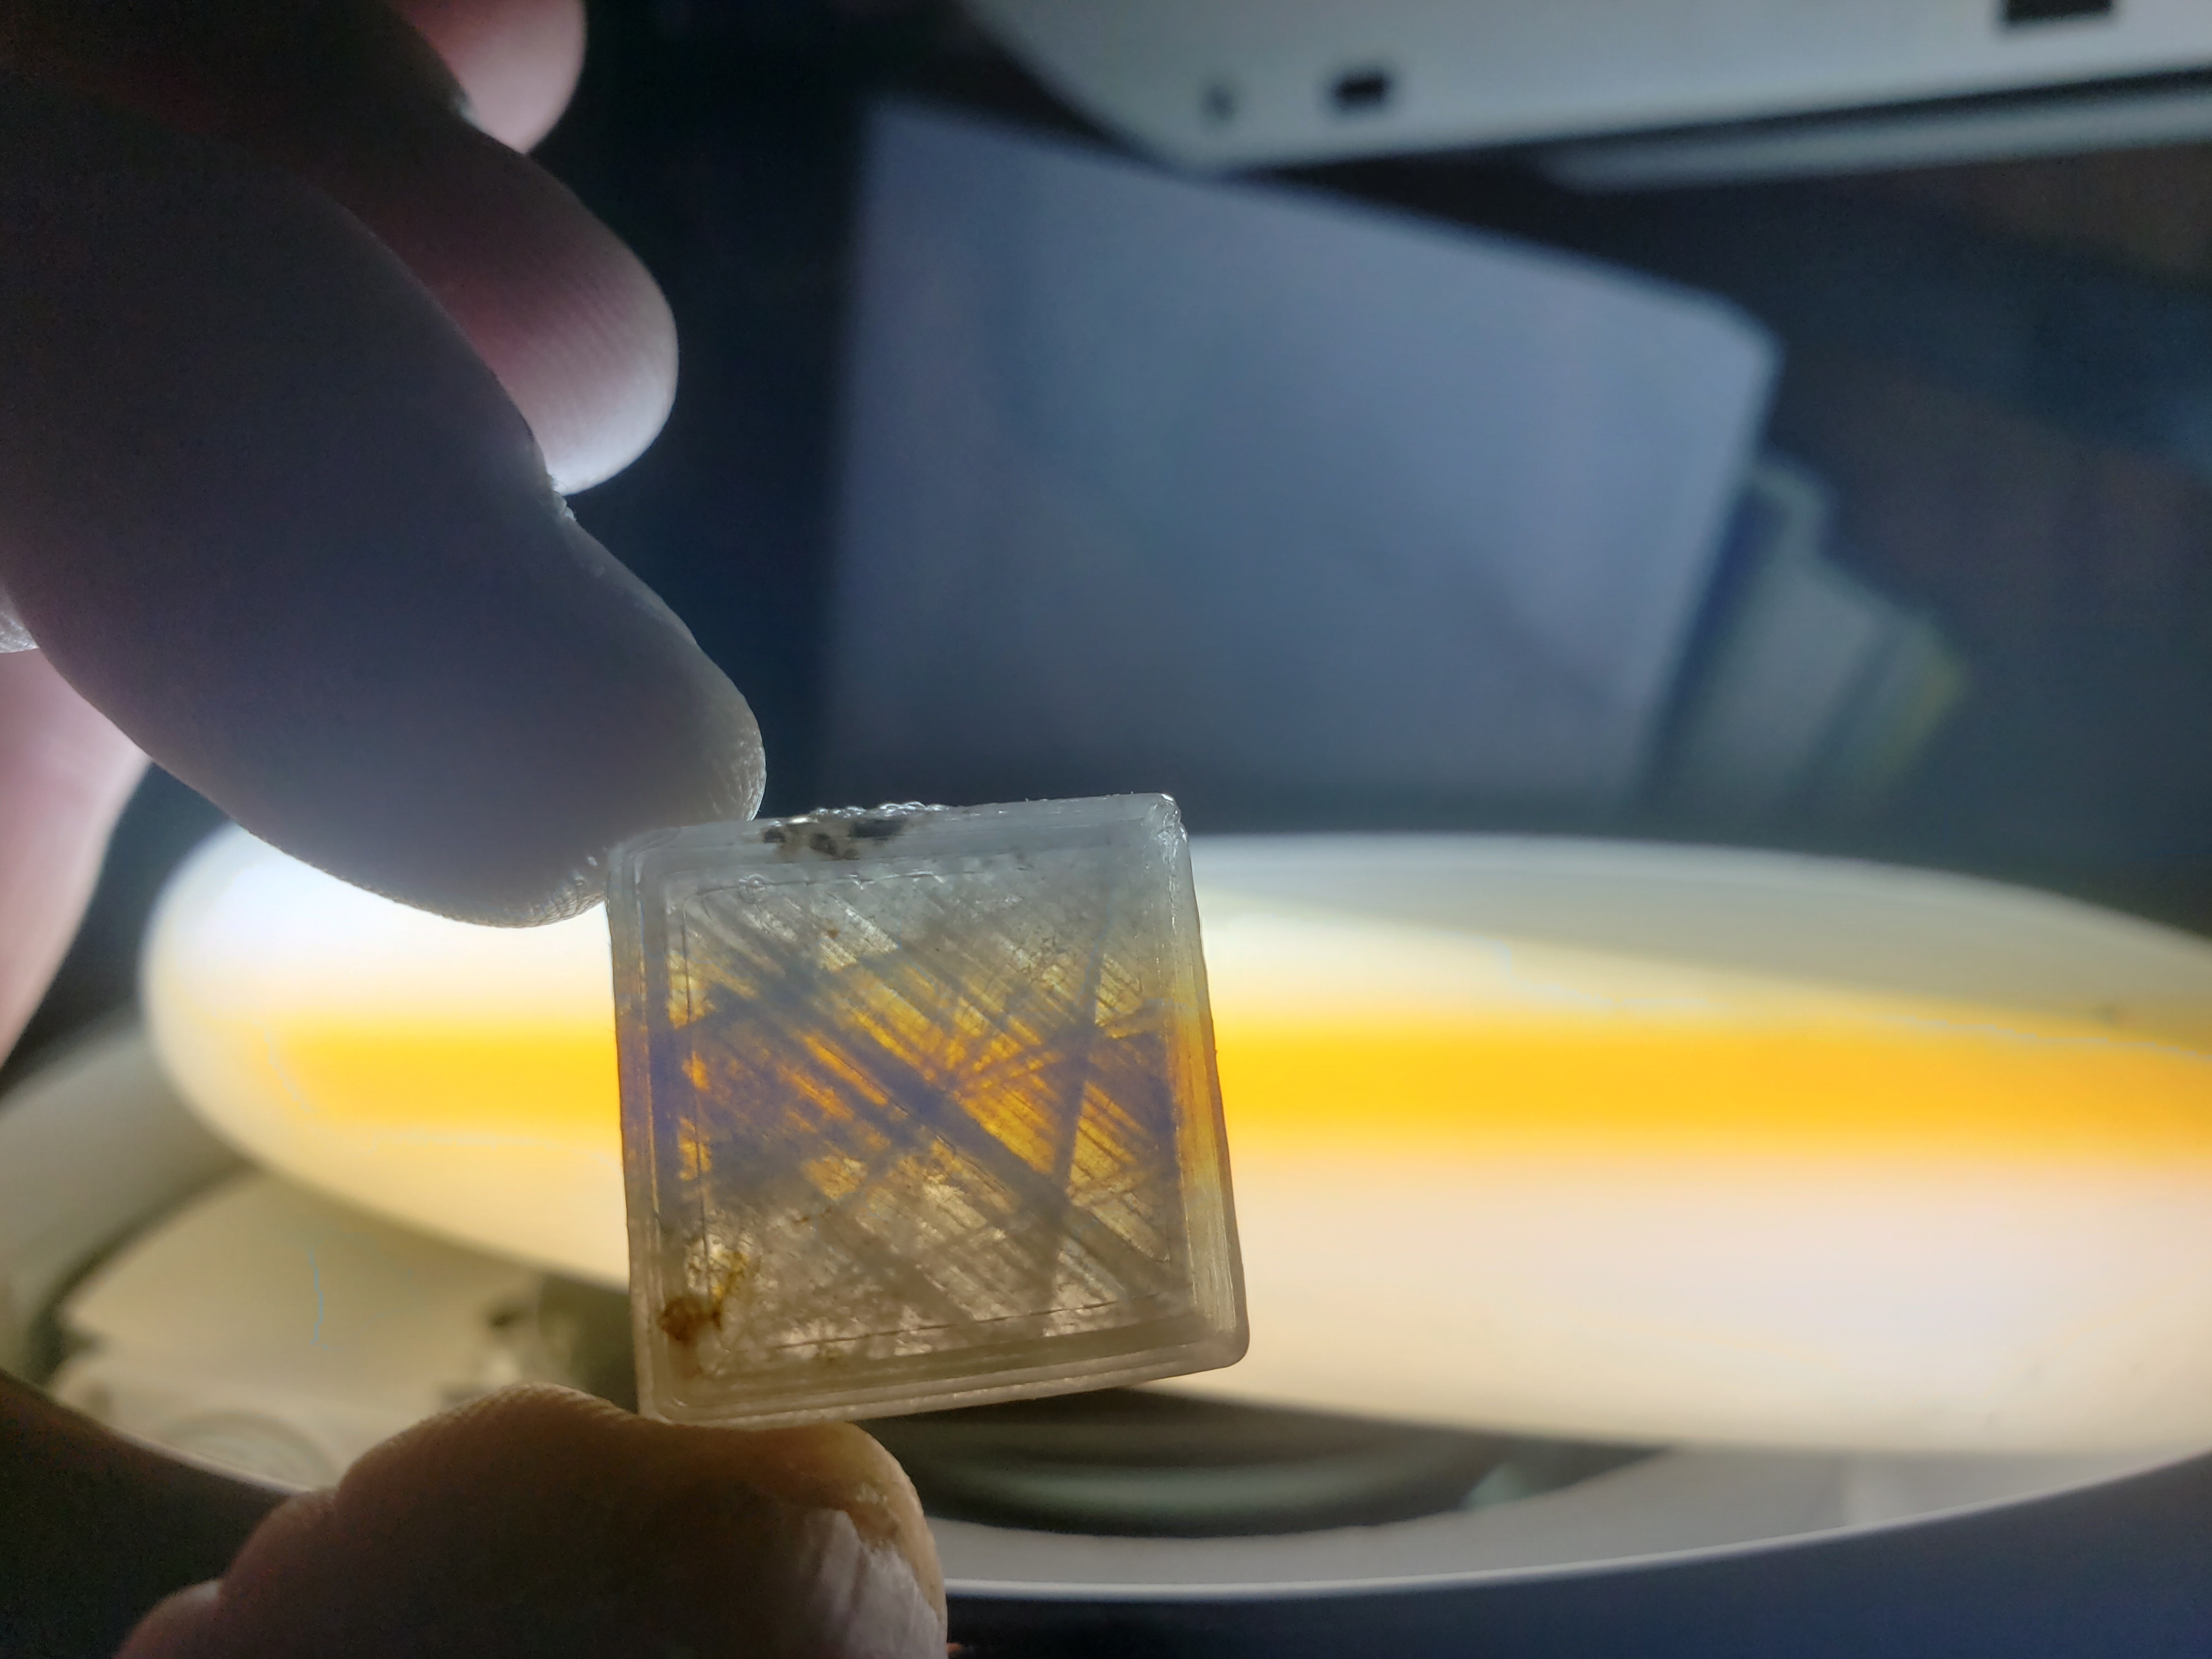 Test square held up to flourescent bulb